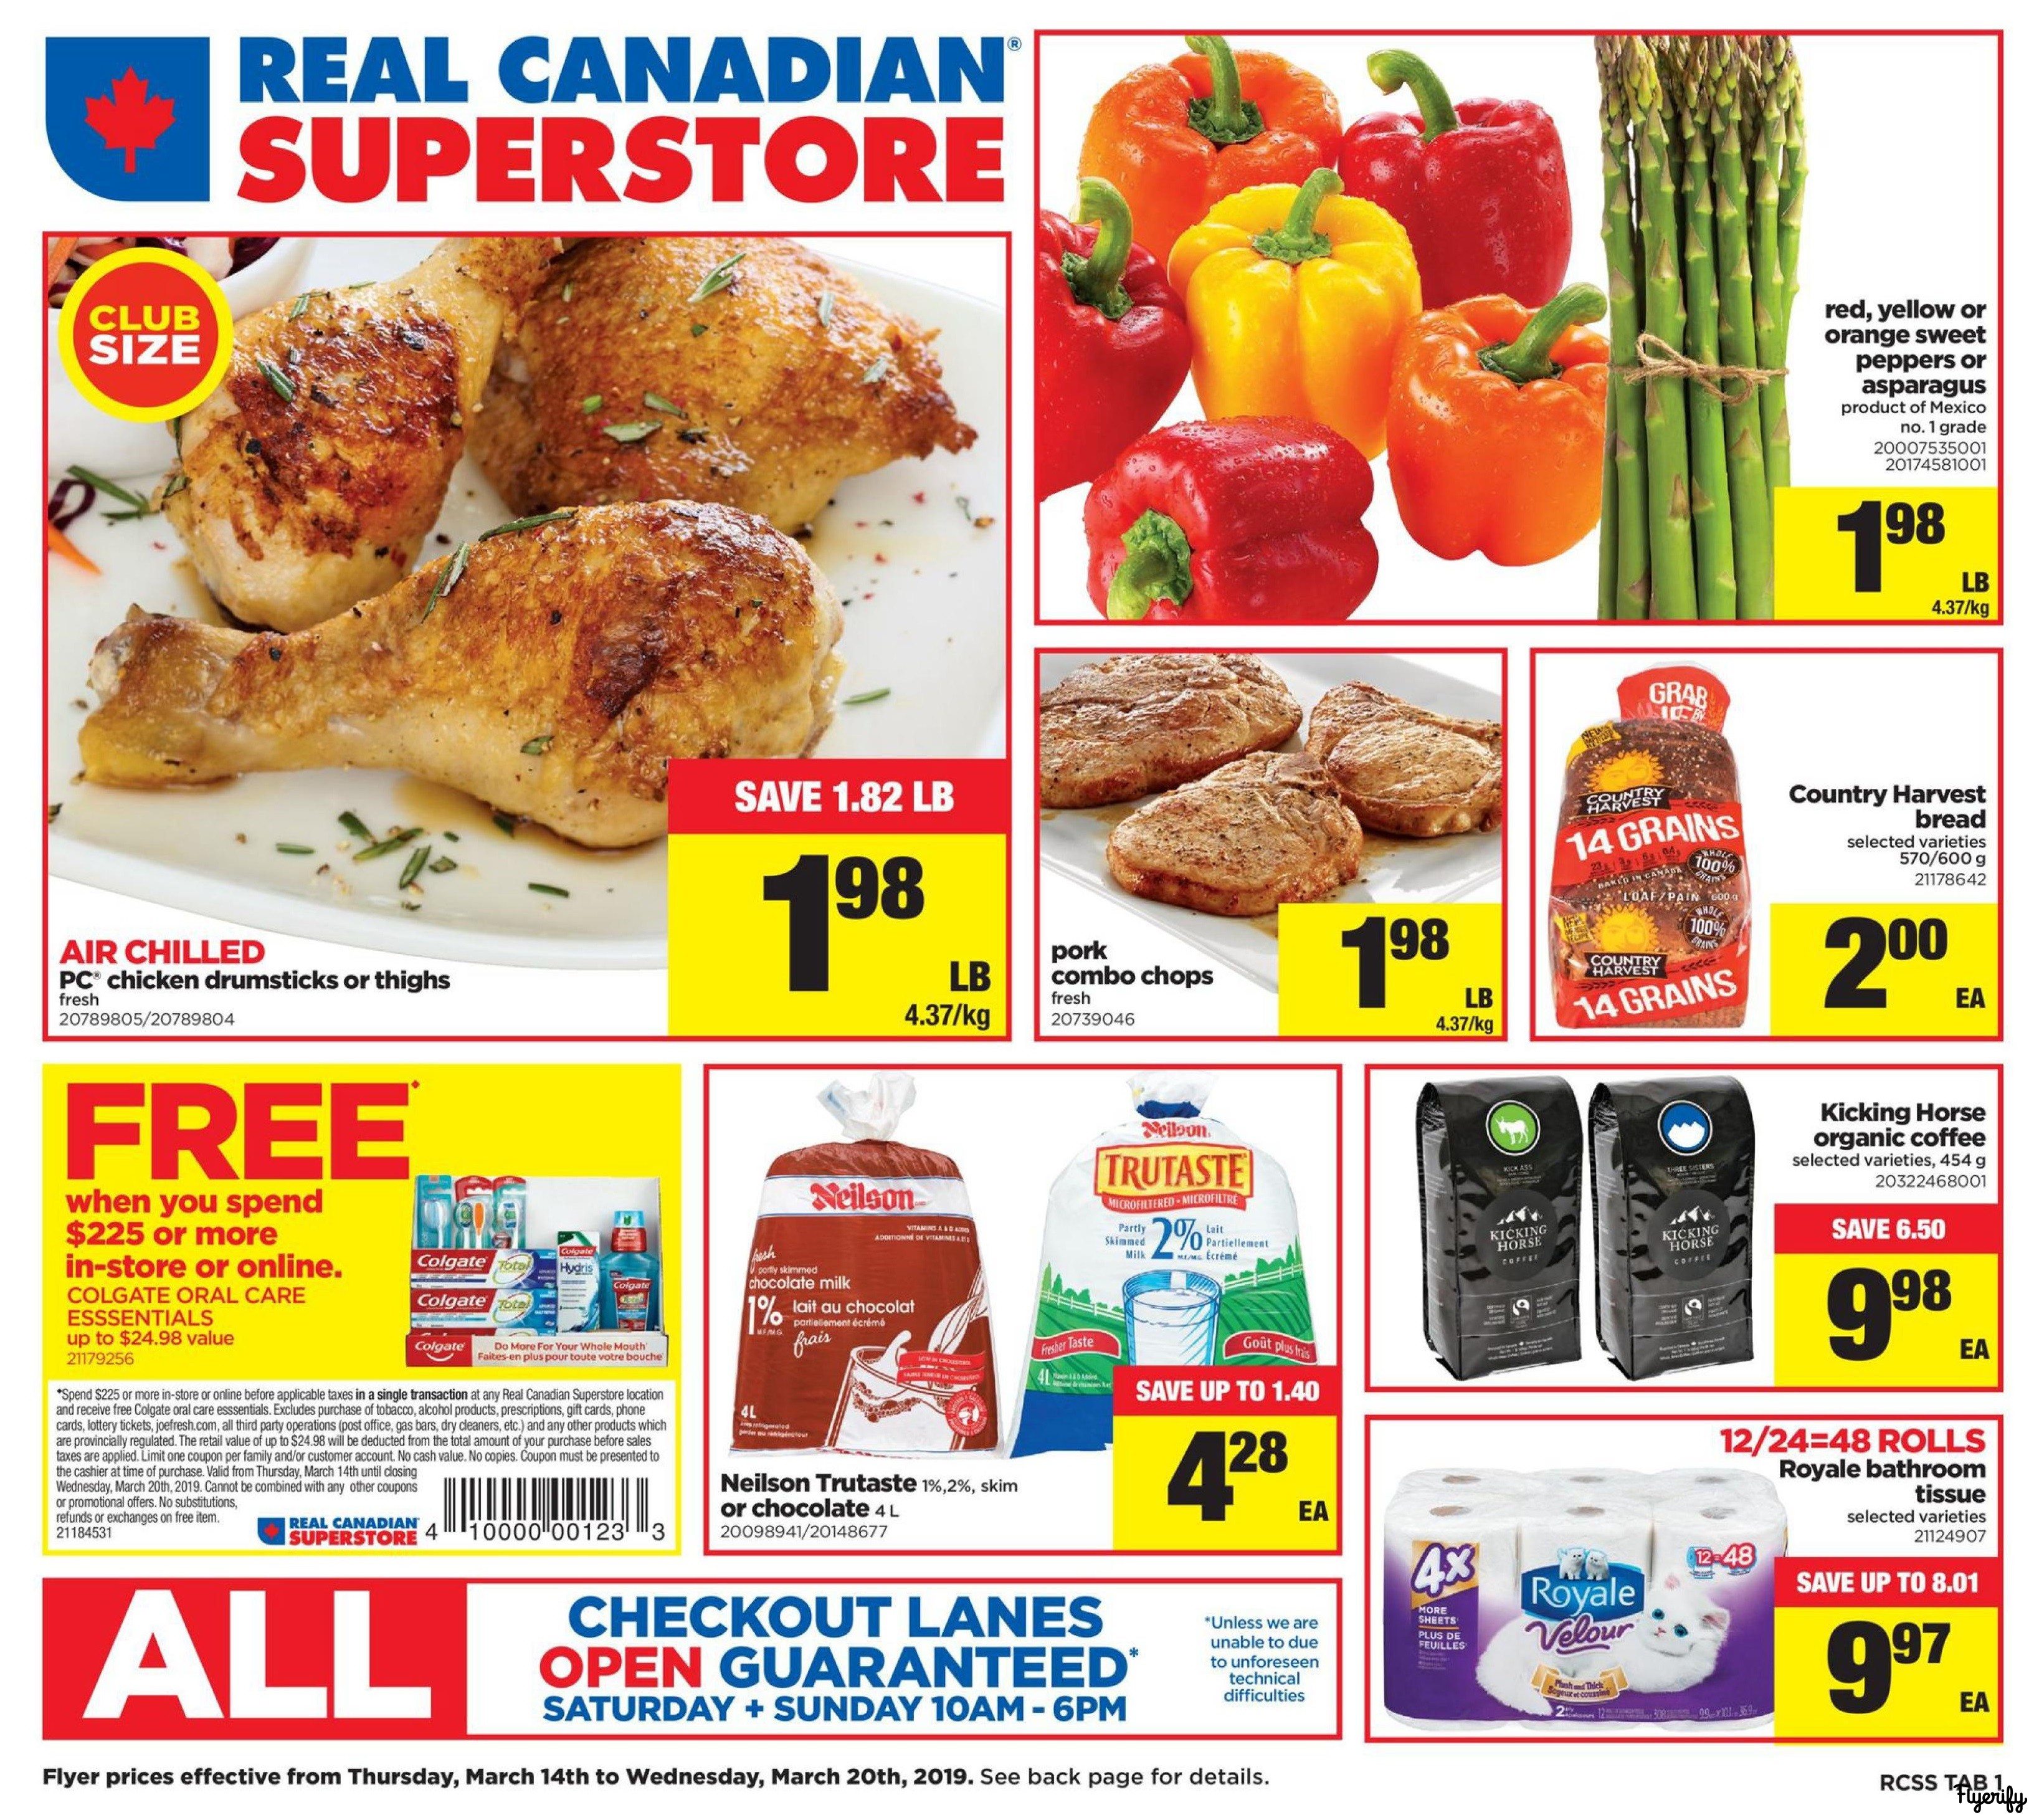 Real Canadian Superstore On Flyer March 14 To 201 25 